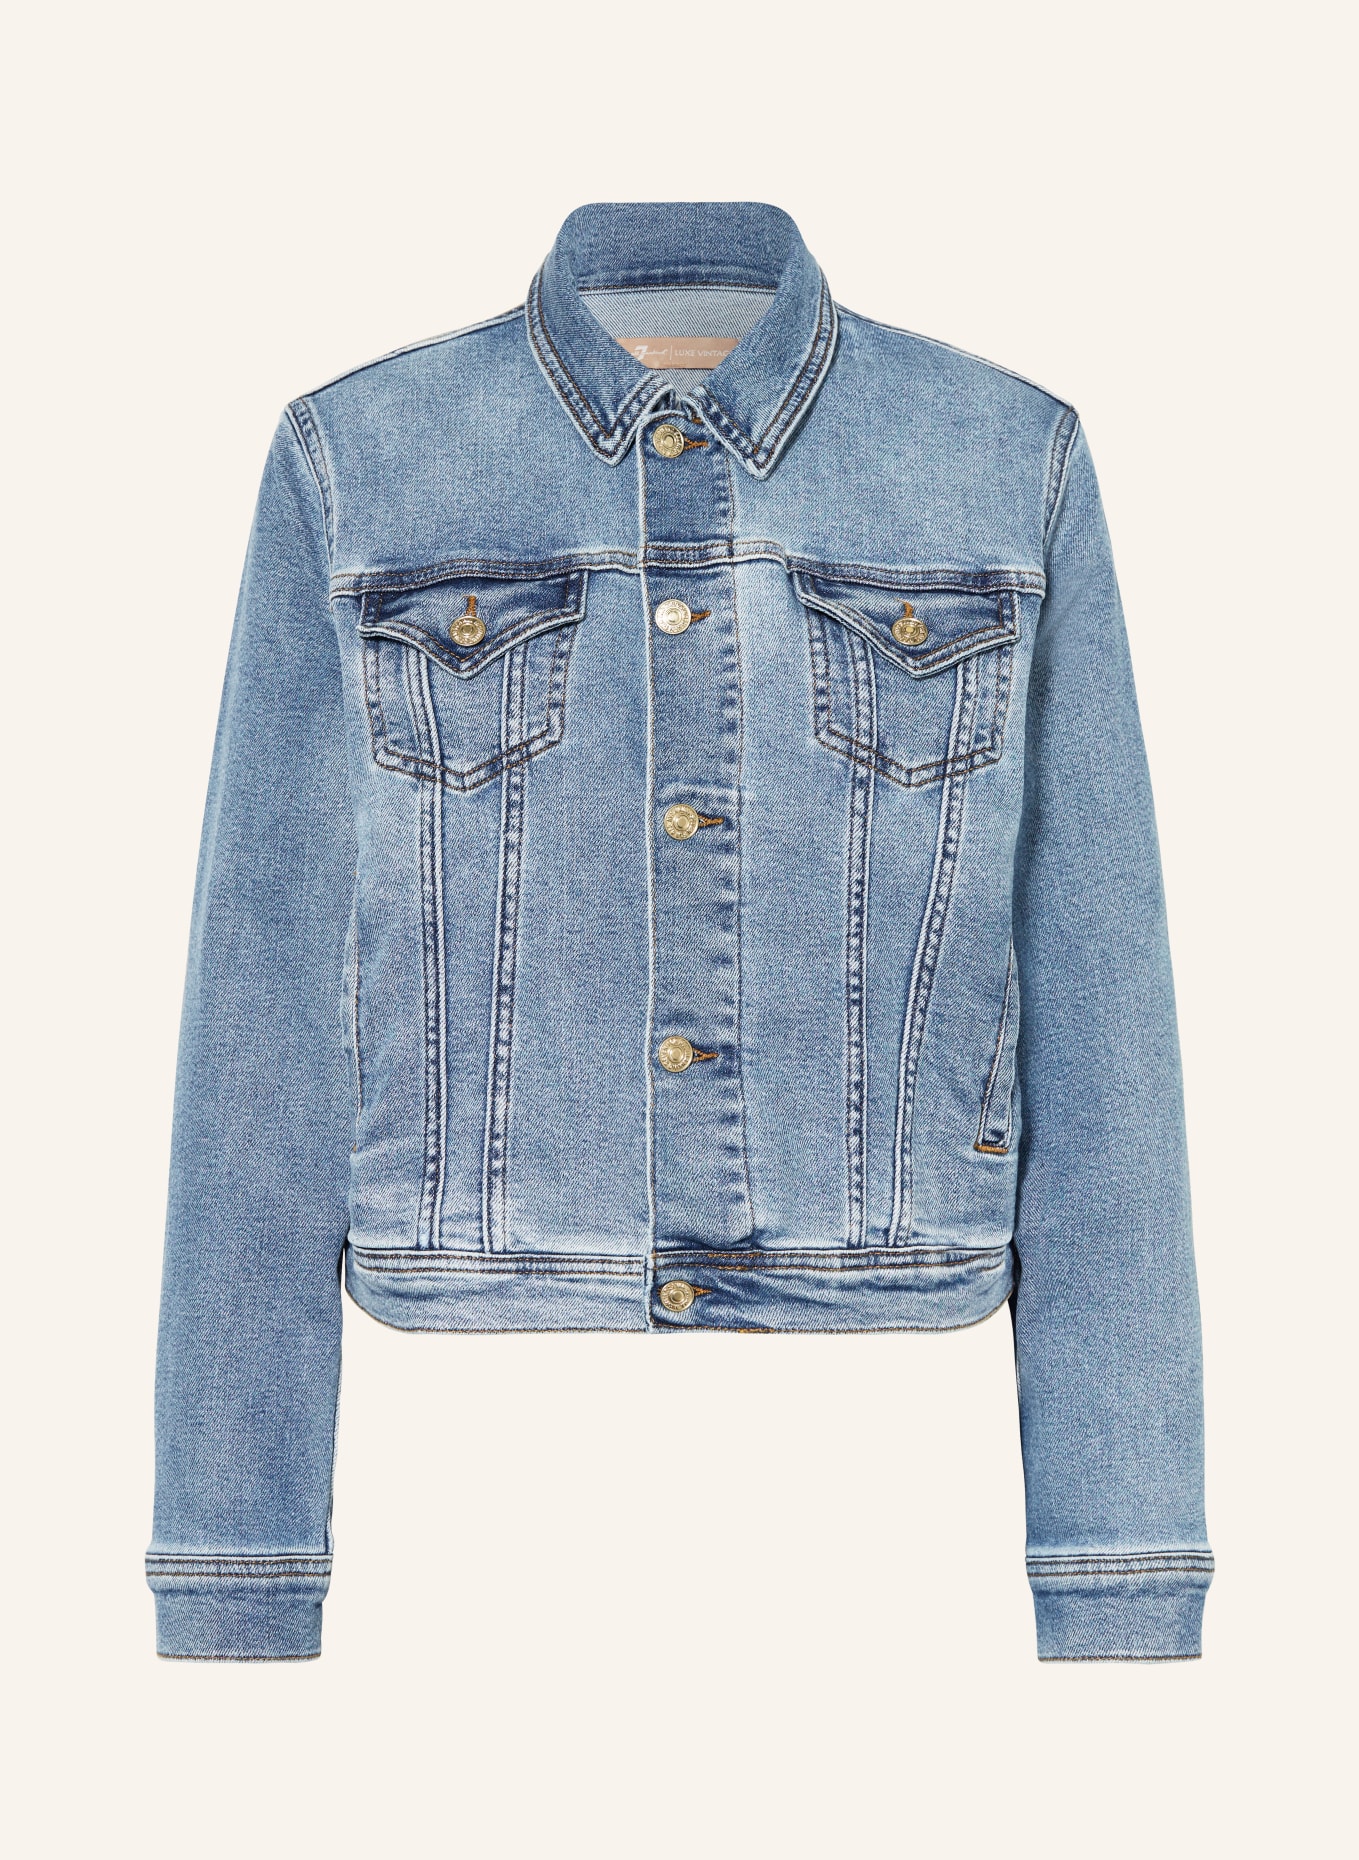 7 for all mankind Denim jacket CLASSIC TRUCKER, Color: BLUE (Image 1)